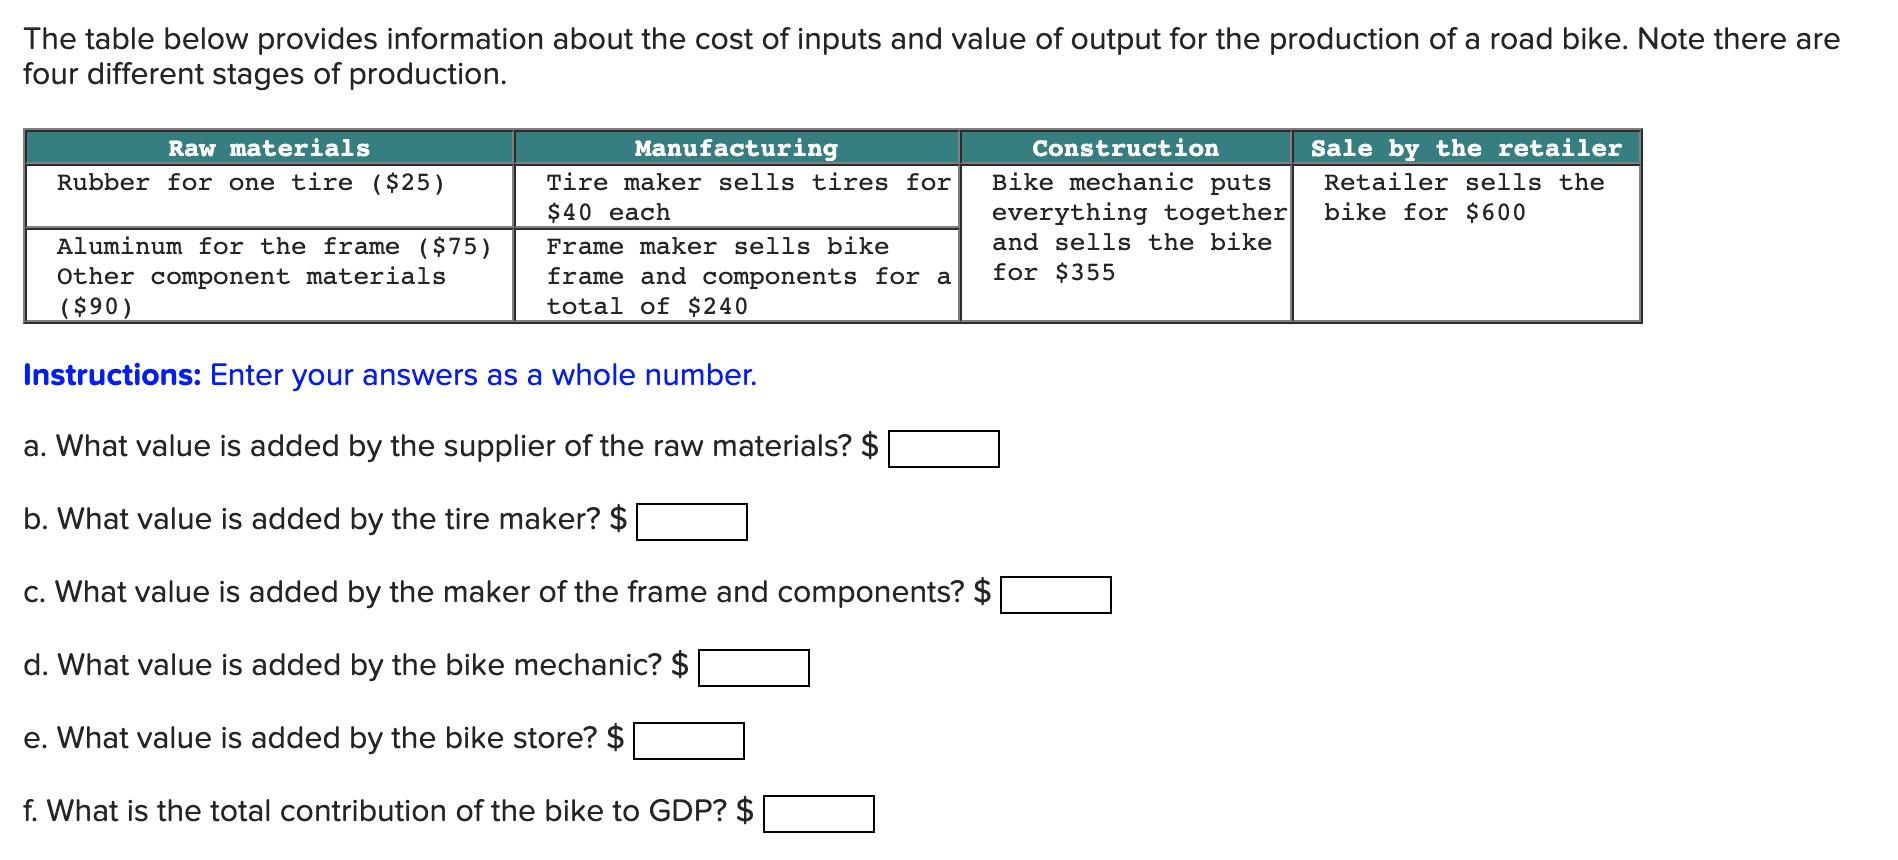 The table below provides information about the cost of inputs and value of output for the production of a road bike. Note the